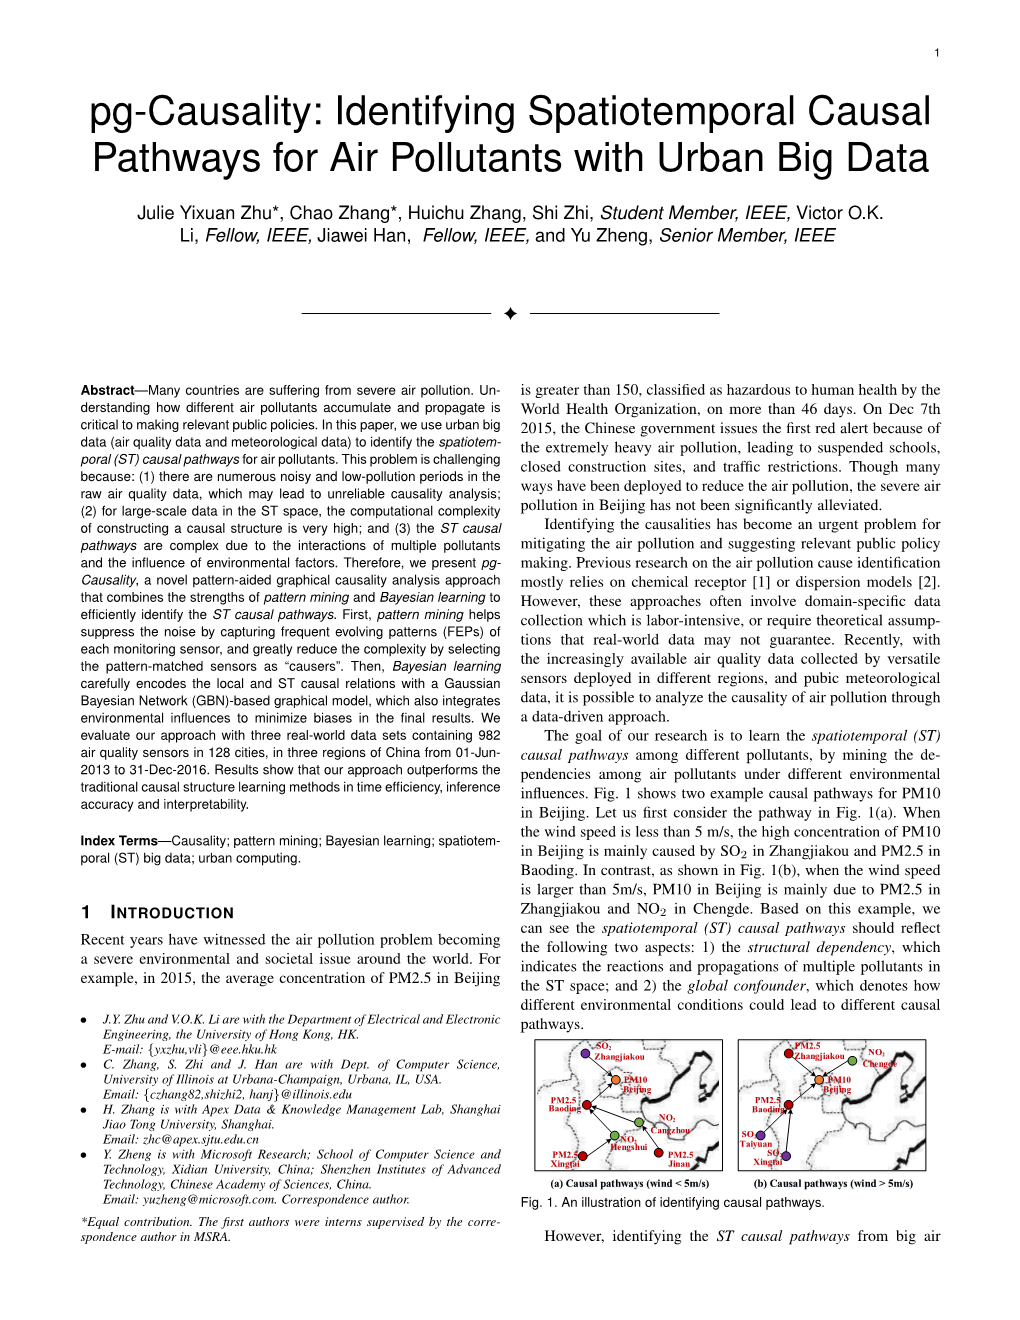 Pg-Causality: Identifying Spatiotemporal Causal Pathways for Air Pollutants with Urban Big Data